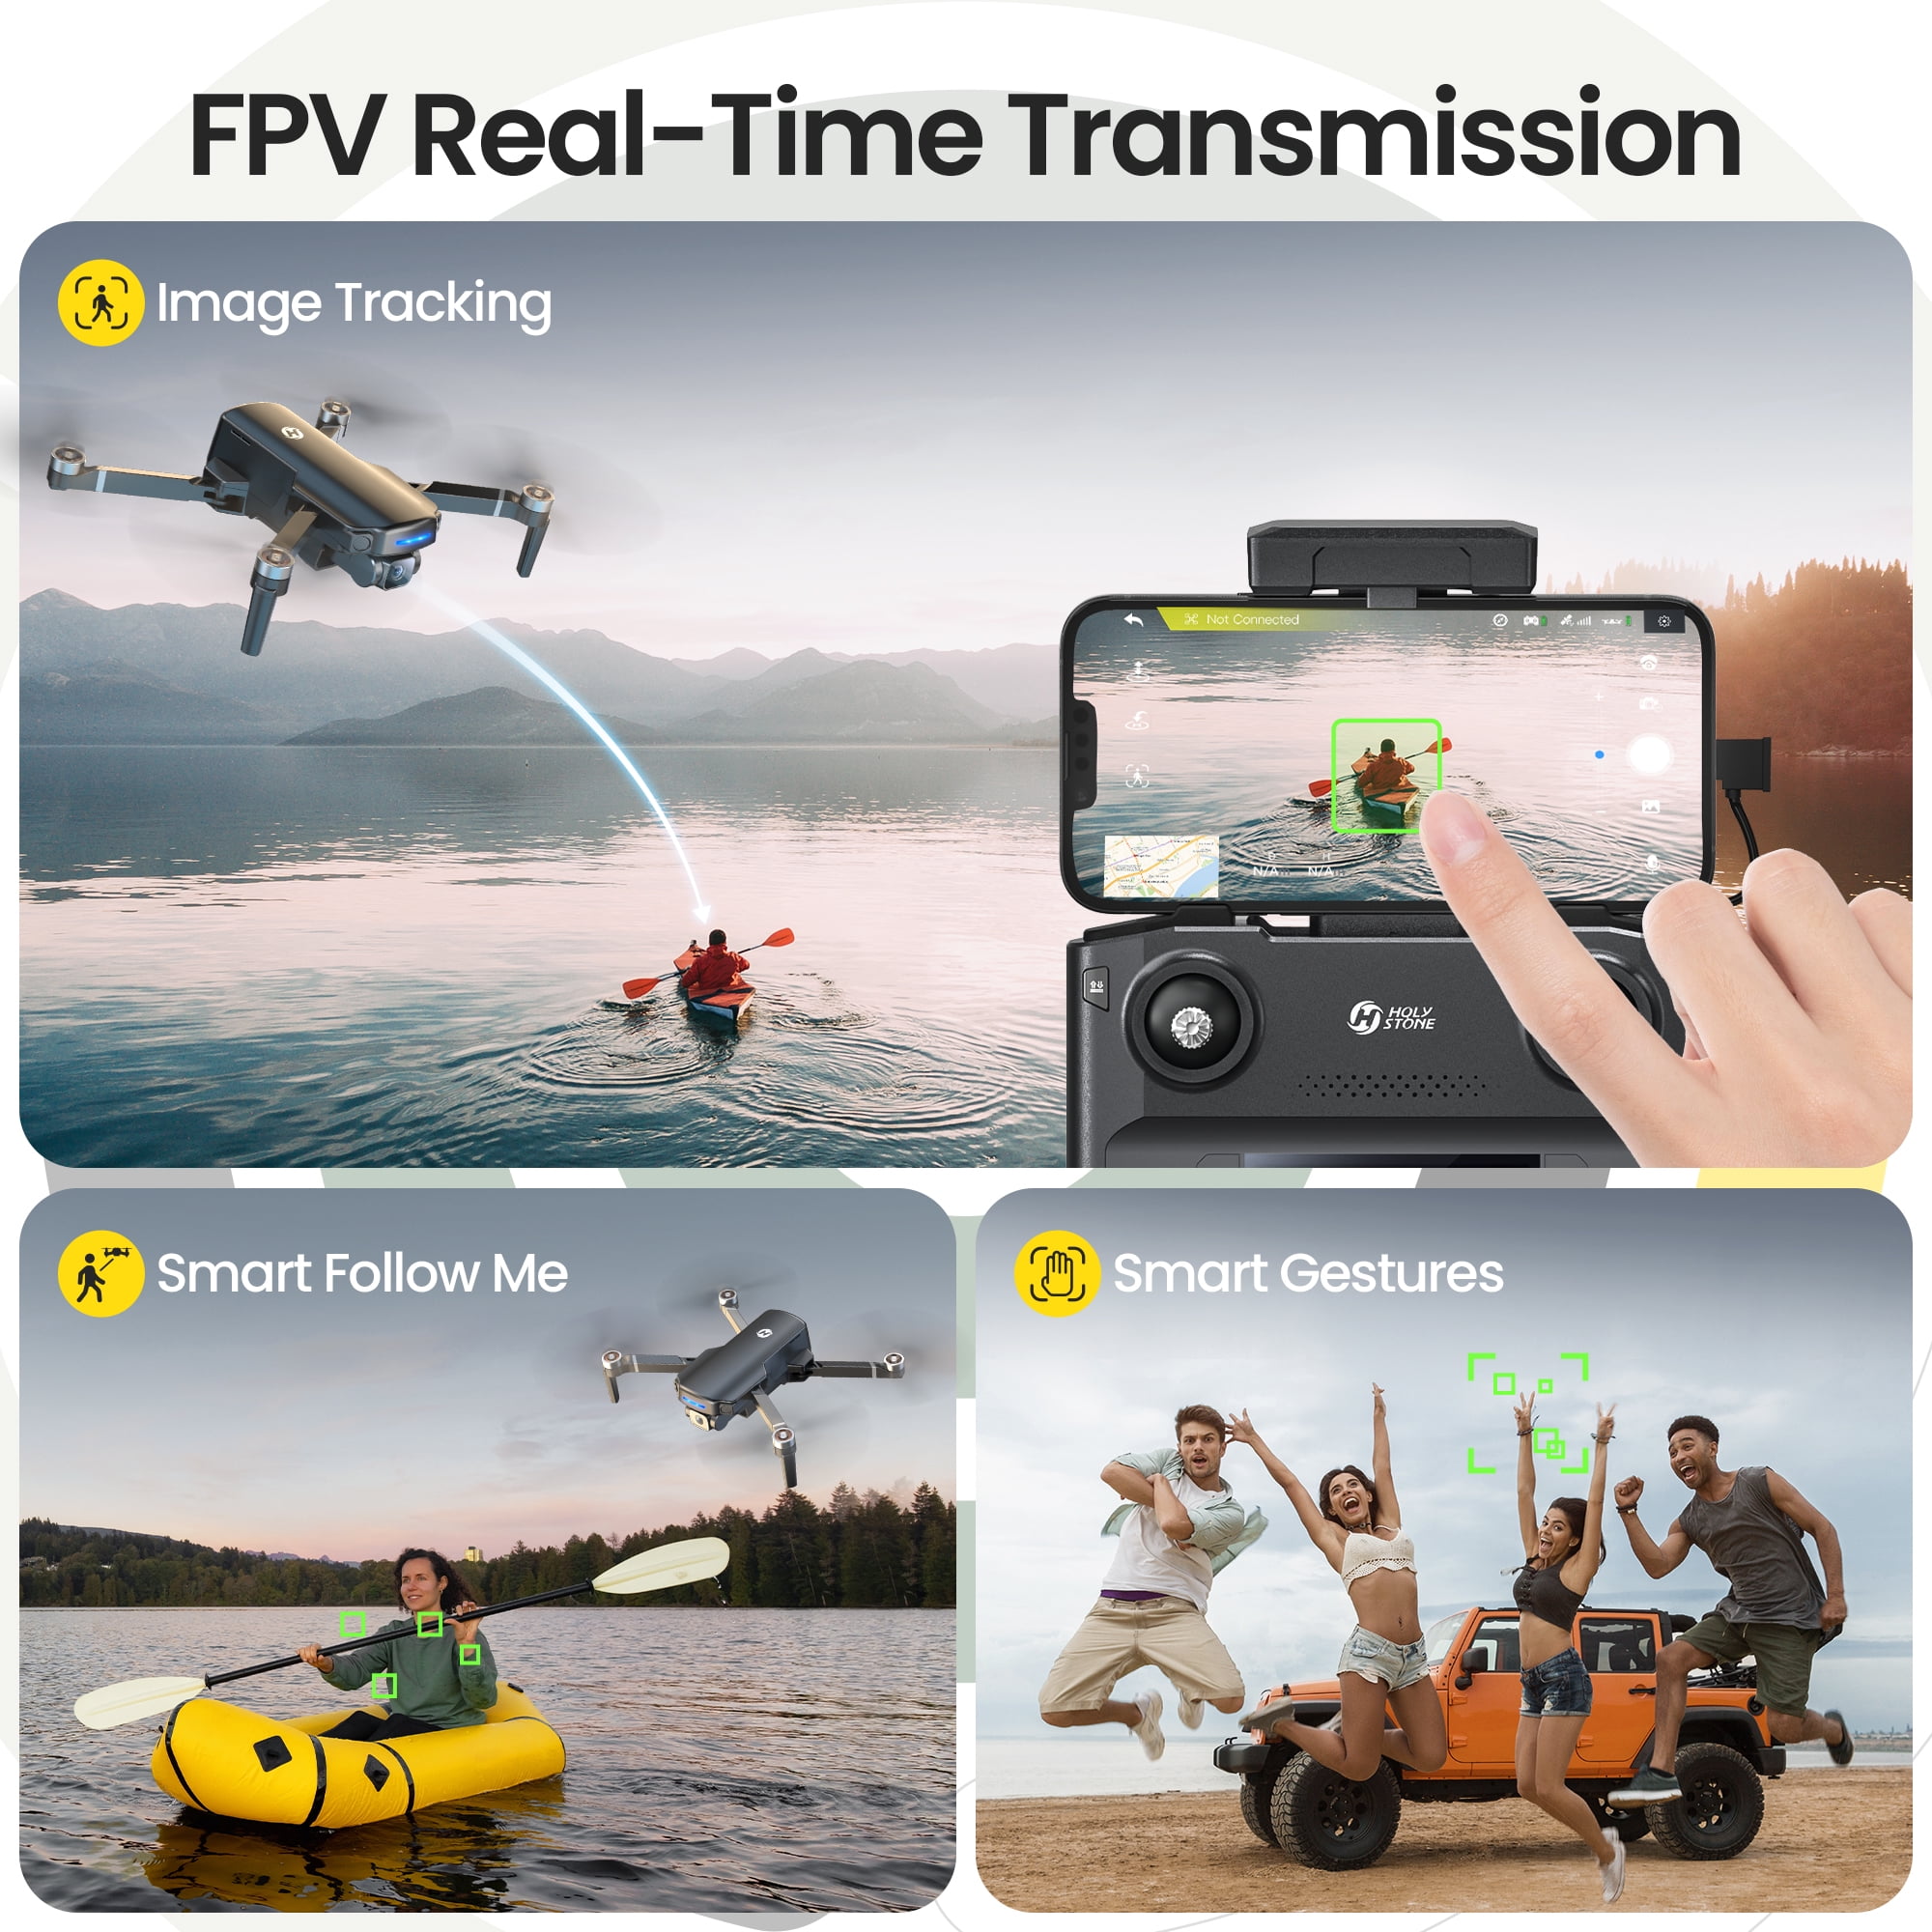 Holy Stone GPS Drone with 4K UHD Camera for Adults Beginner; HS360S 249g  Foldable FPV RC Quadcopter with 10000 Feet Control Range, Brushless Motor